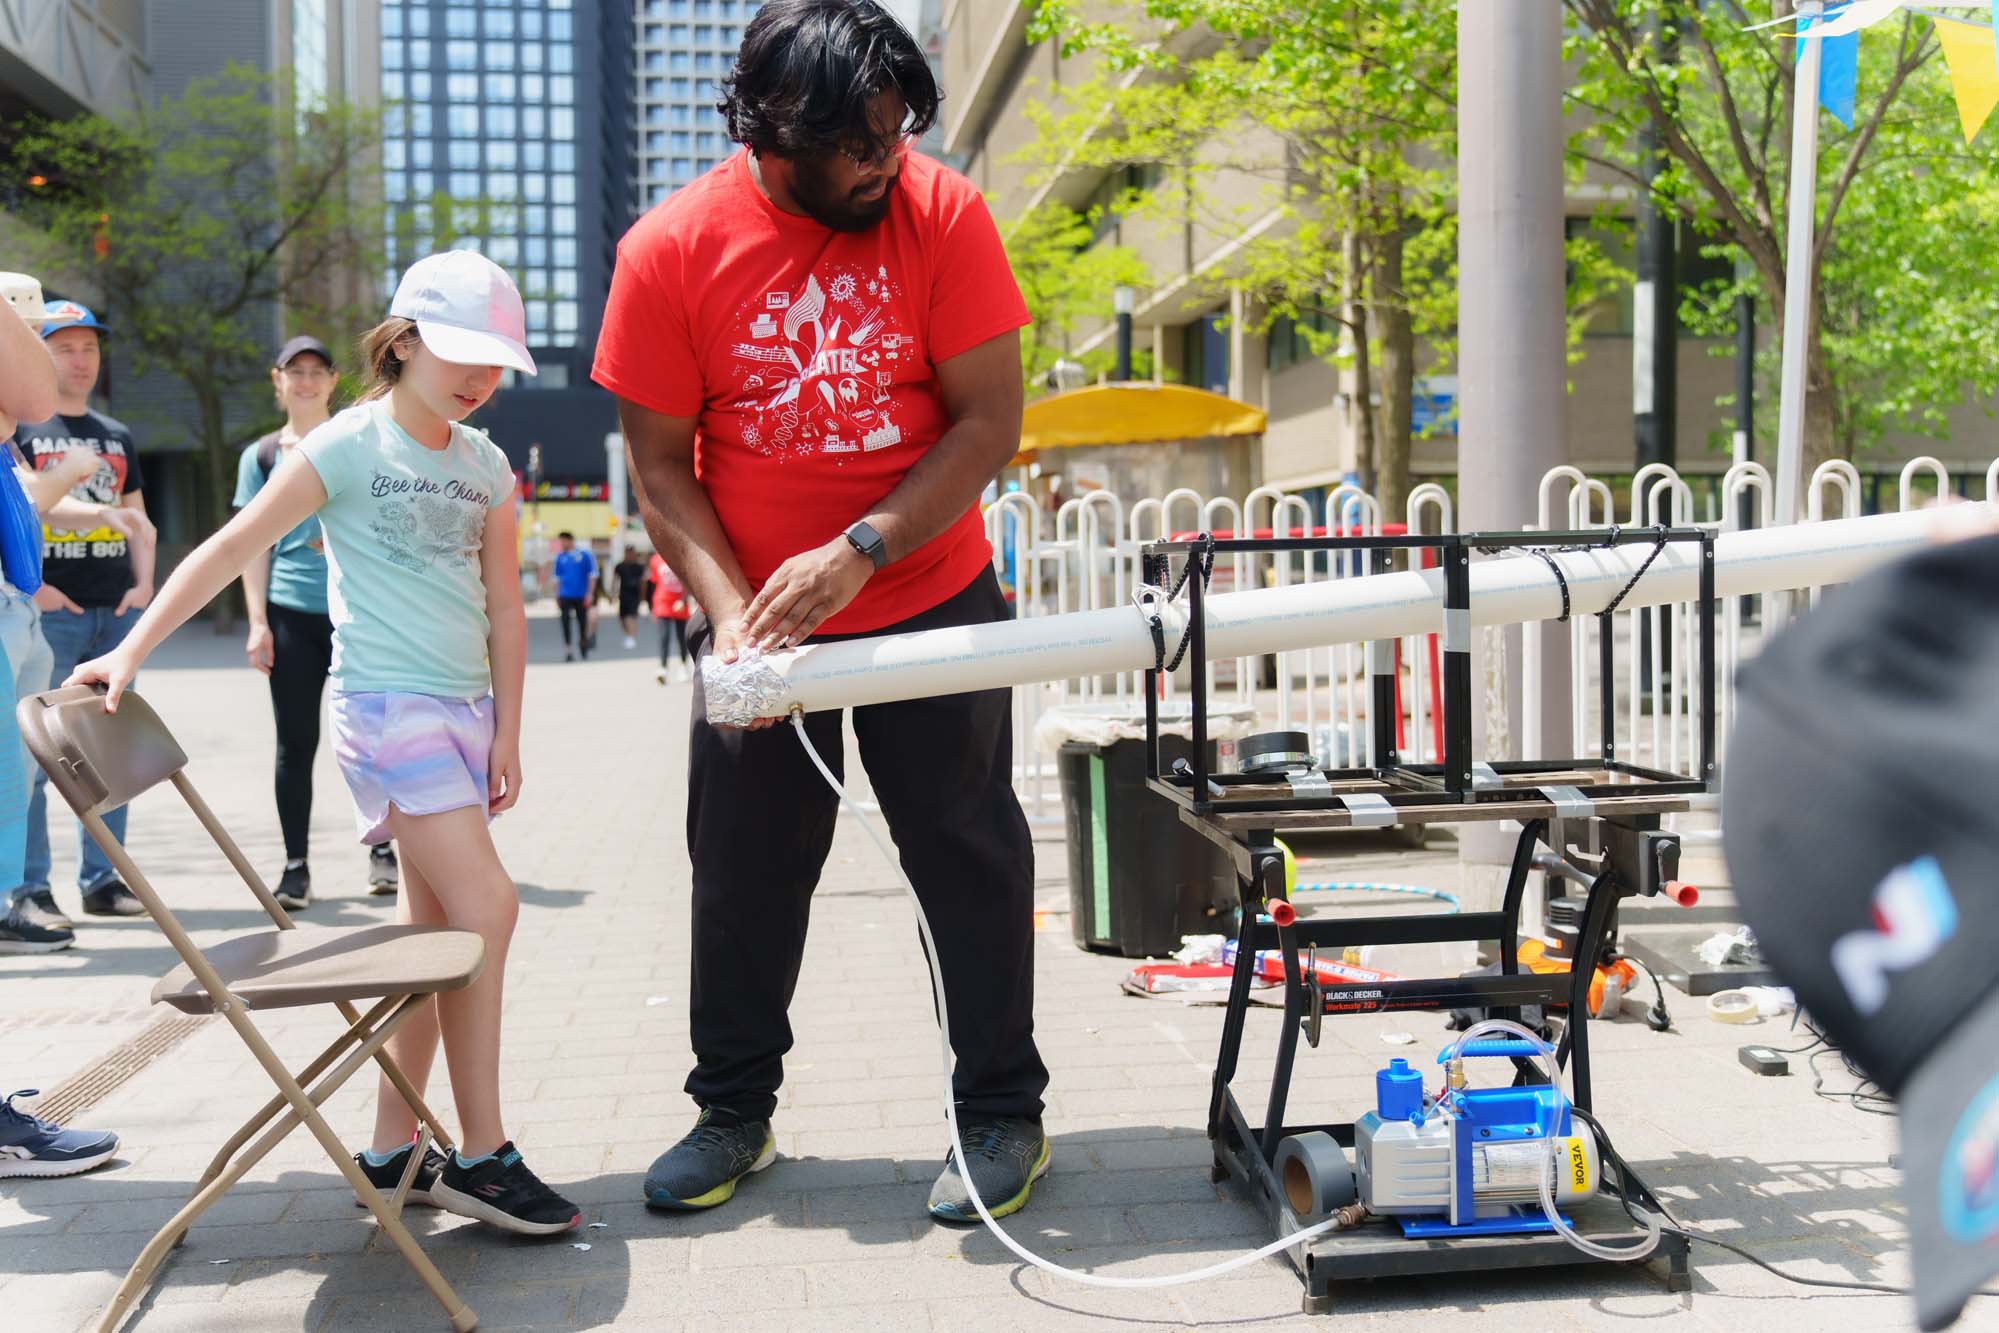 A Science Everywhere volunteer setting up the vacuum launcher in front of a child.